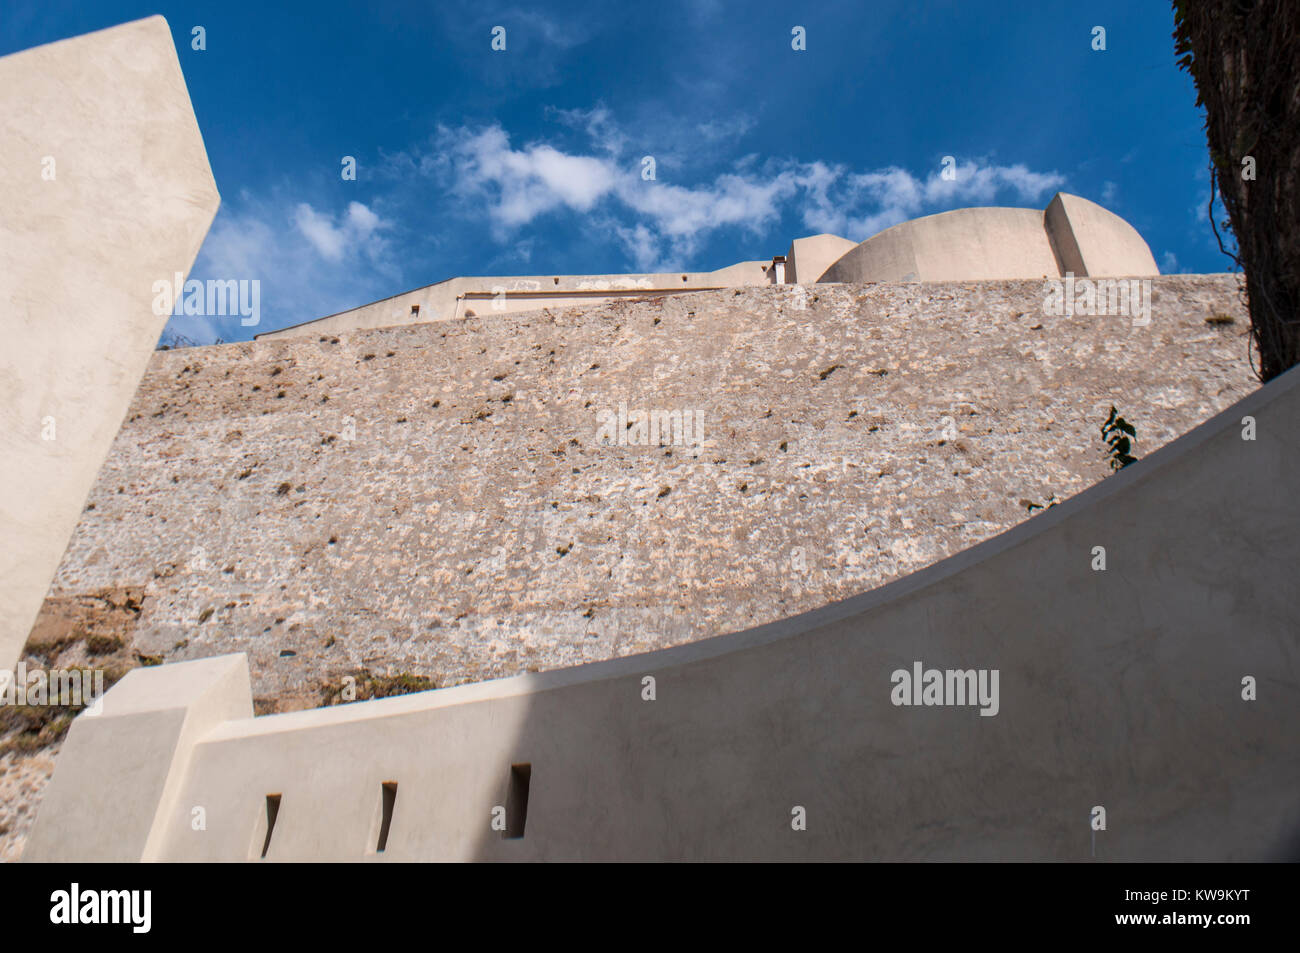 Corsica: architectural details of the ancient walls of the perched Citadel of Calvi, famous tourist destination on the northwest coast Stock Photo